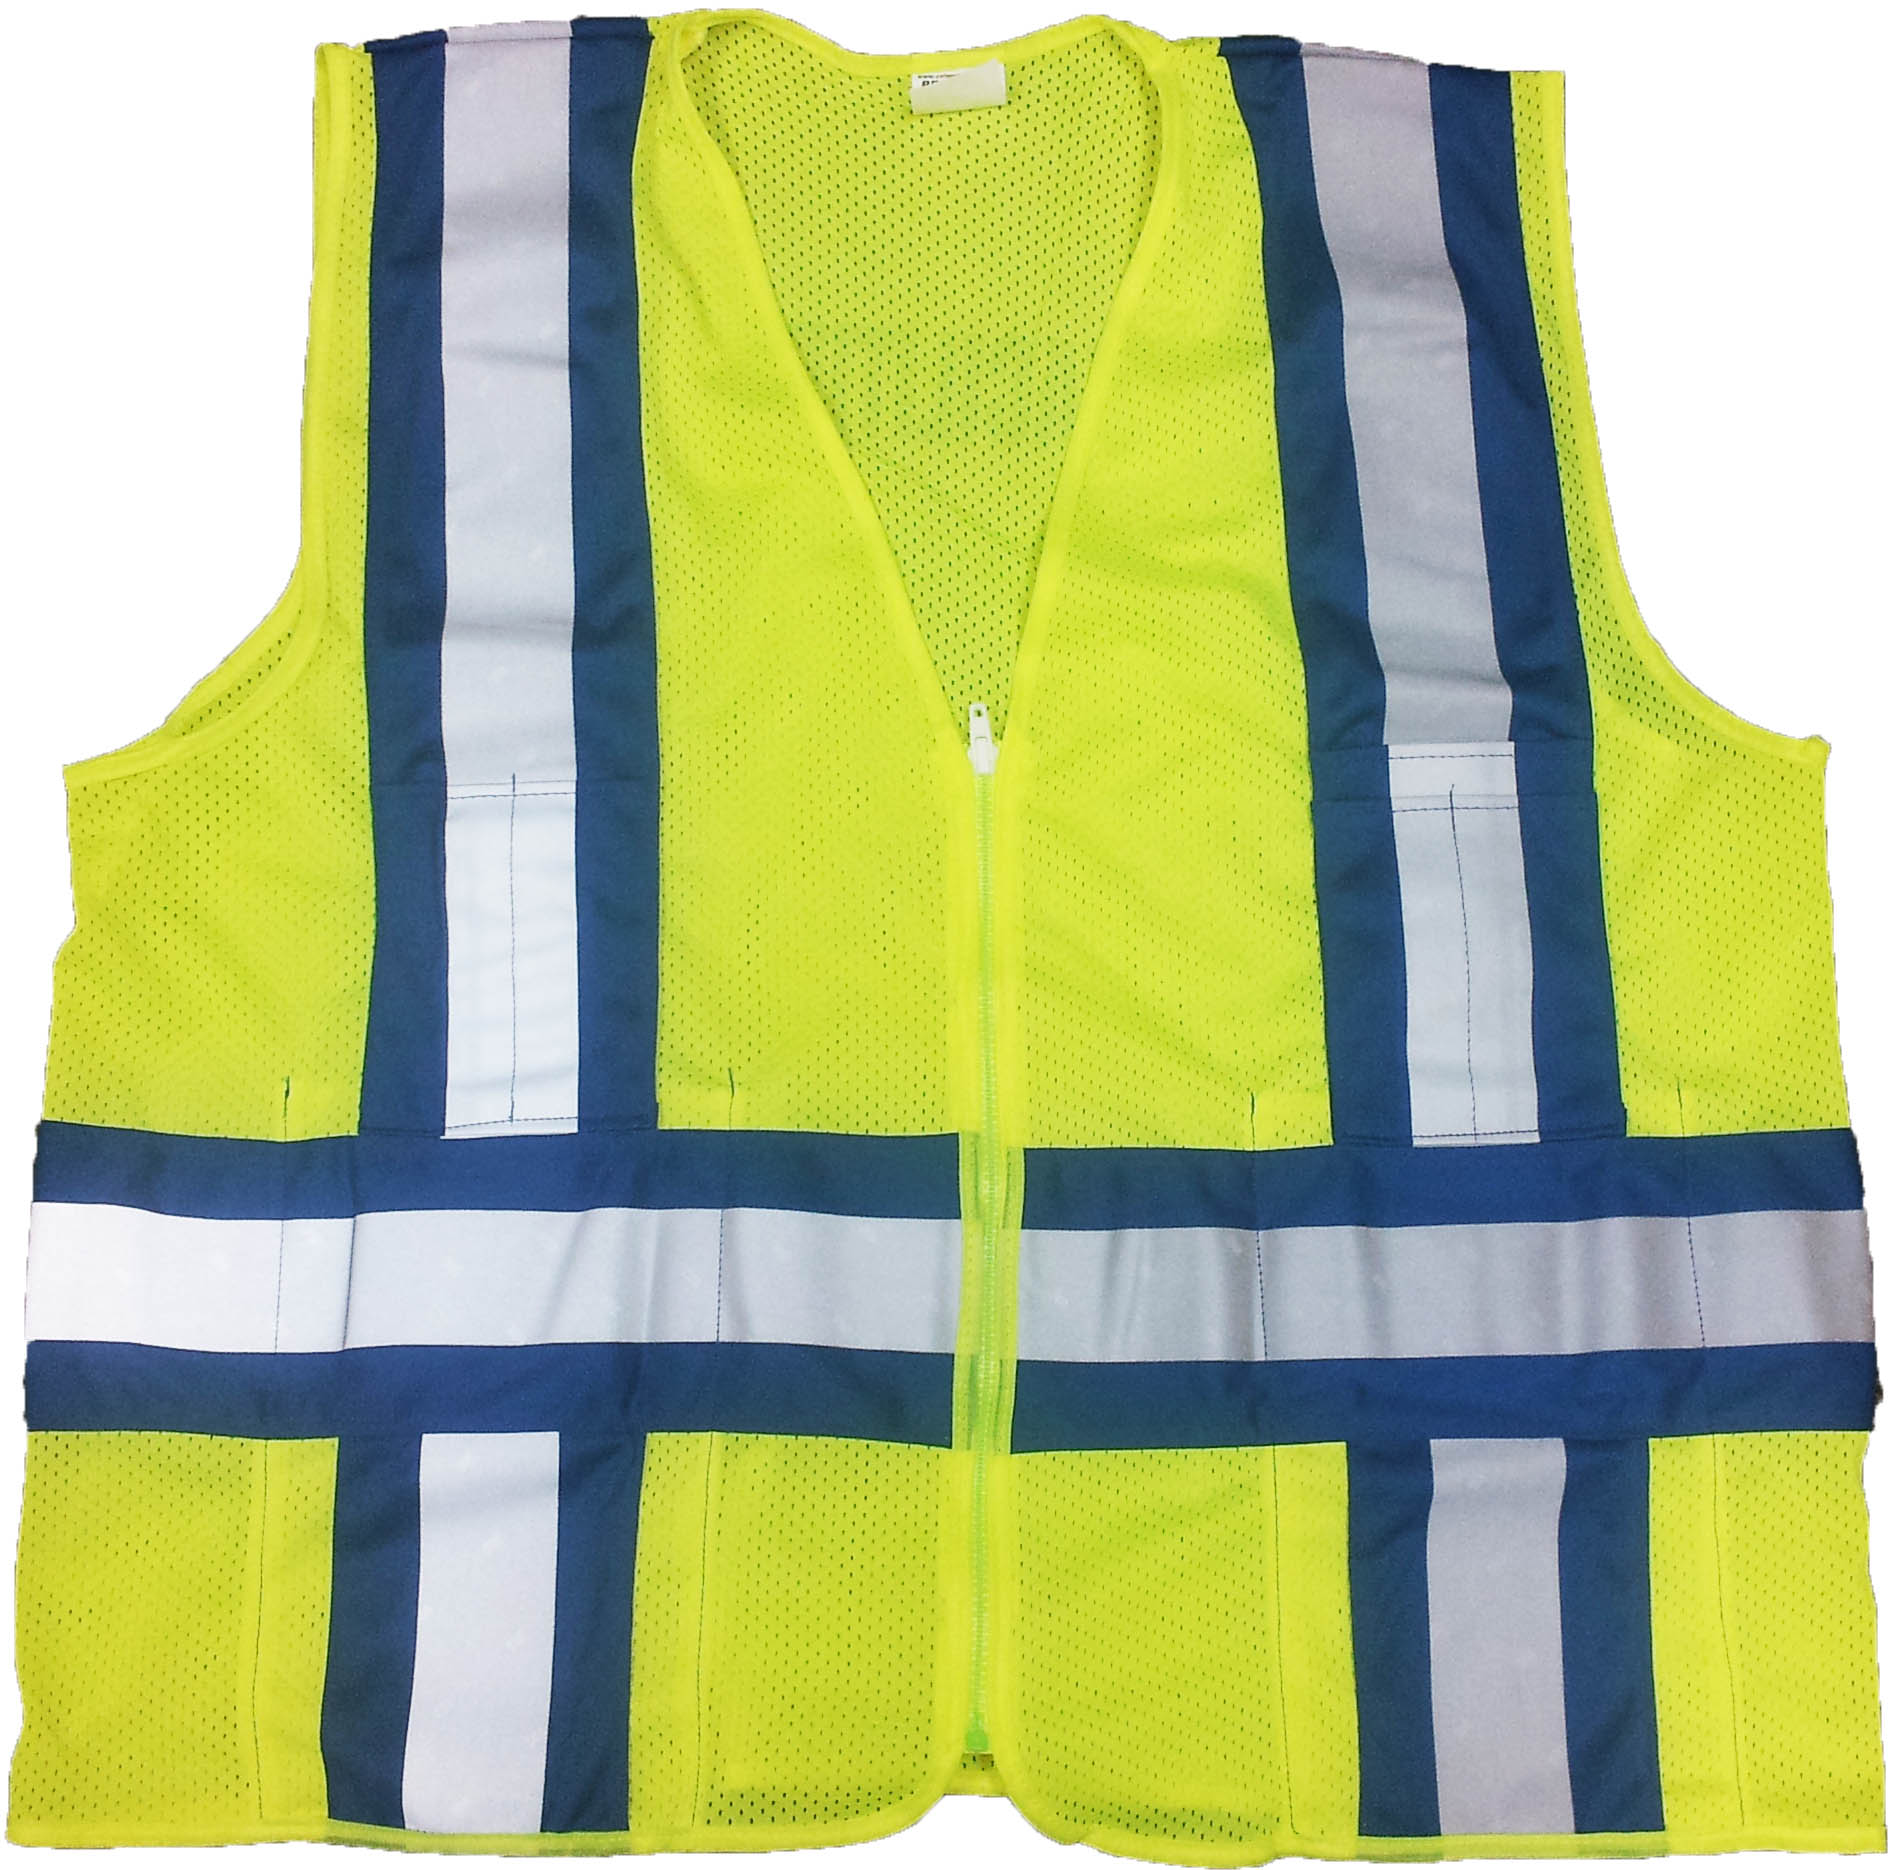 Safety Vests - 350-0117790 - Lime Mesh Safety Vest with Blue/Silver Laminated S